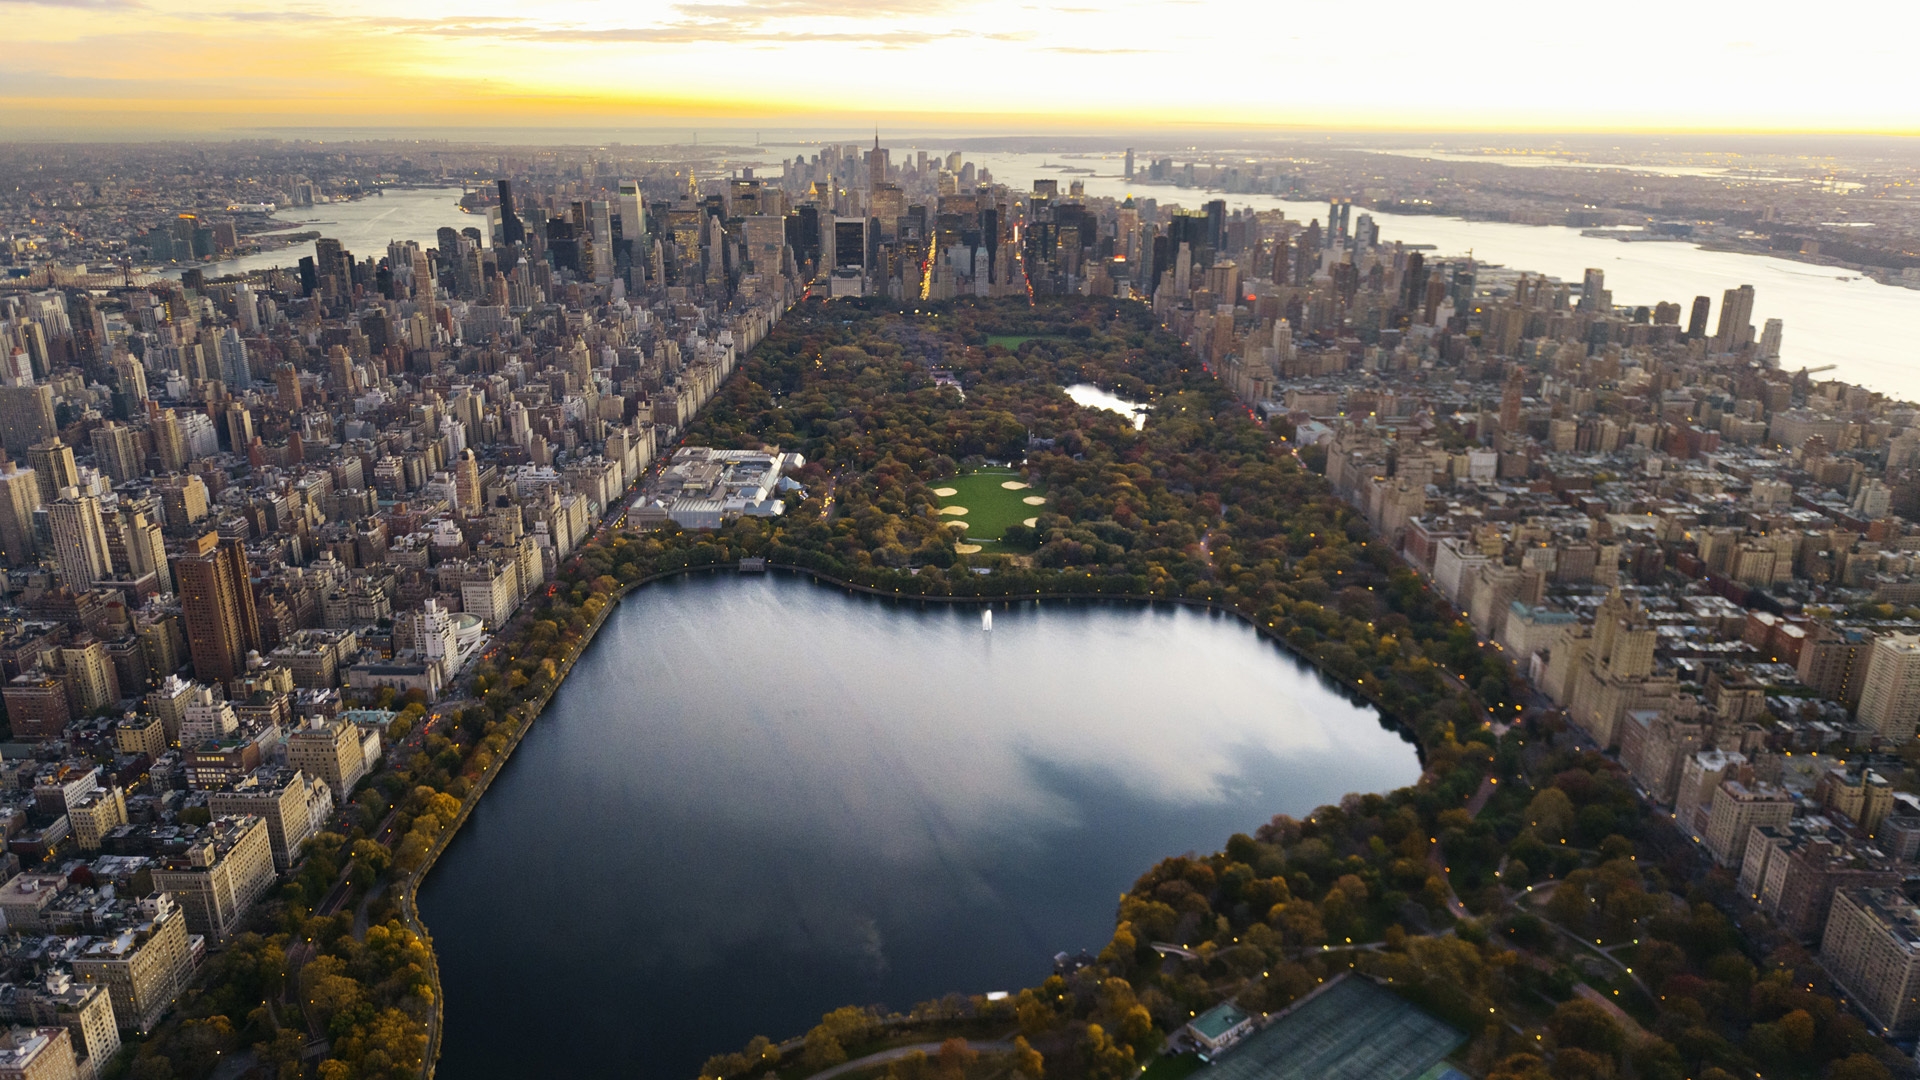 Download Wallpaper 1920x1080 Central park Panorama Night New york